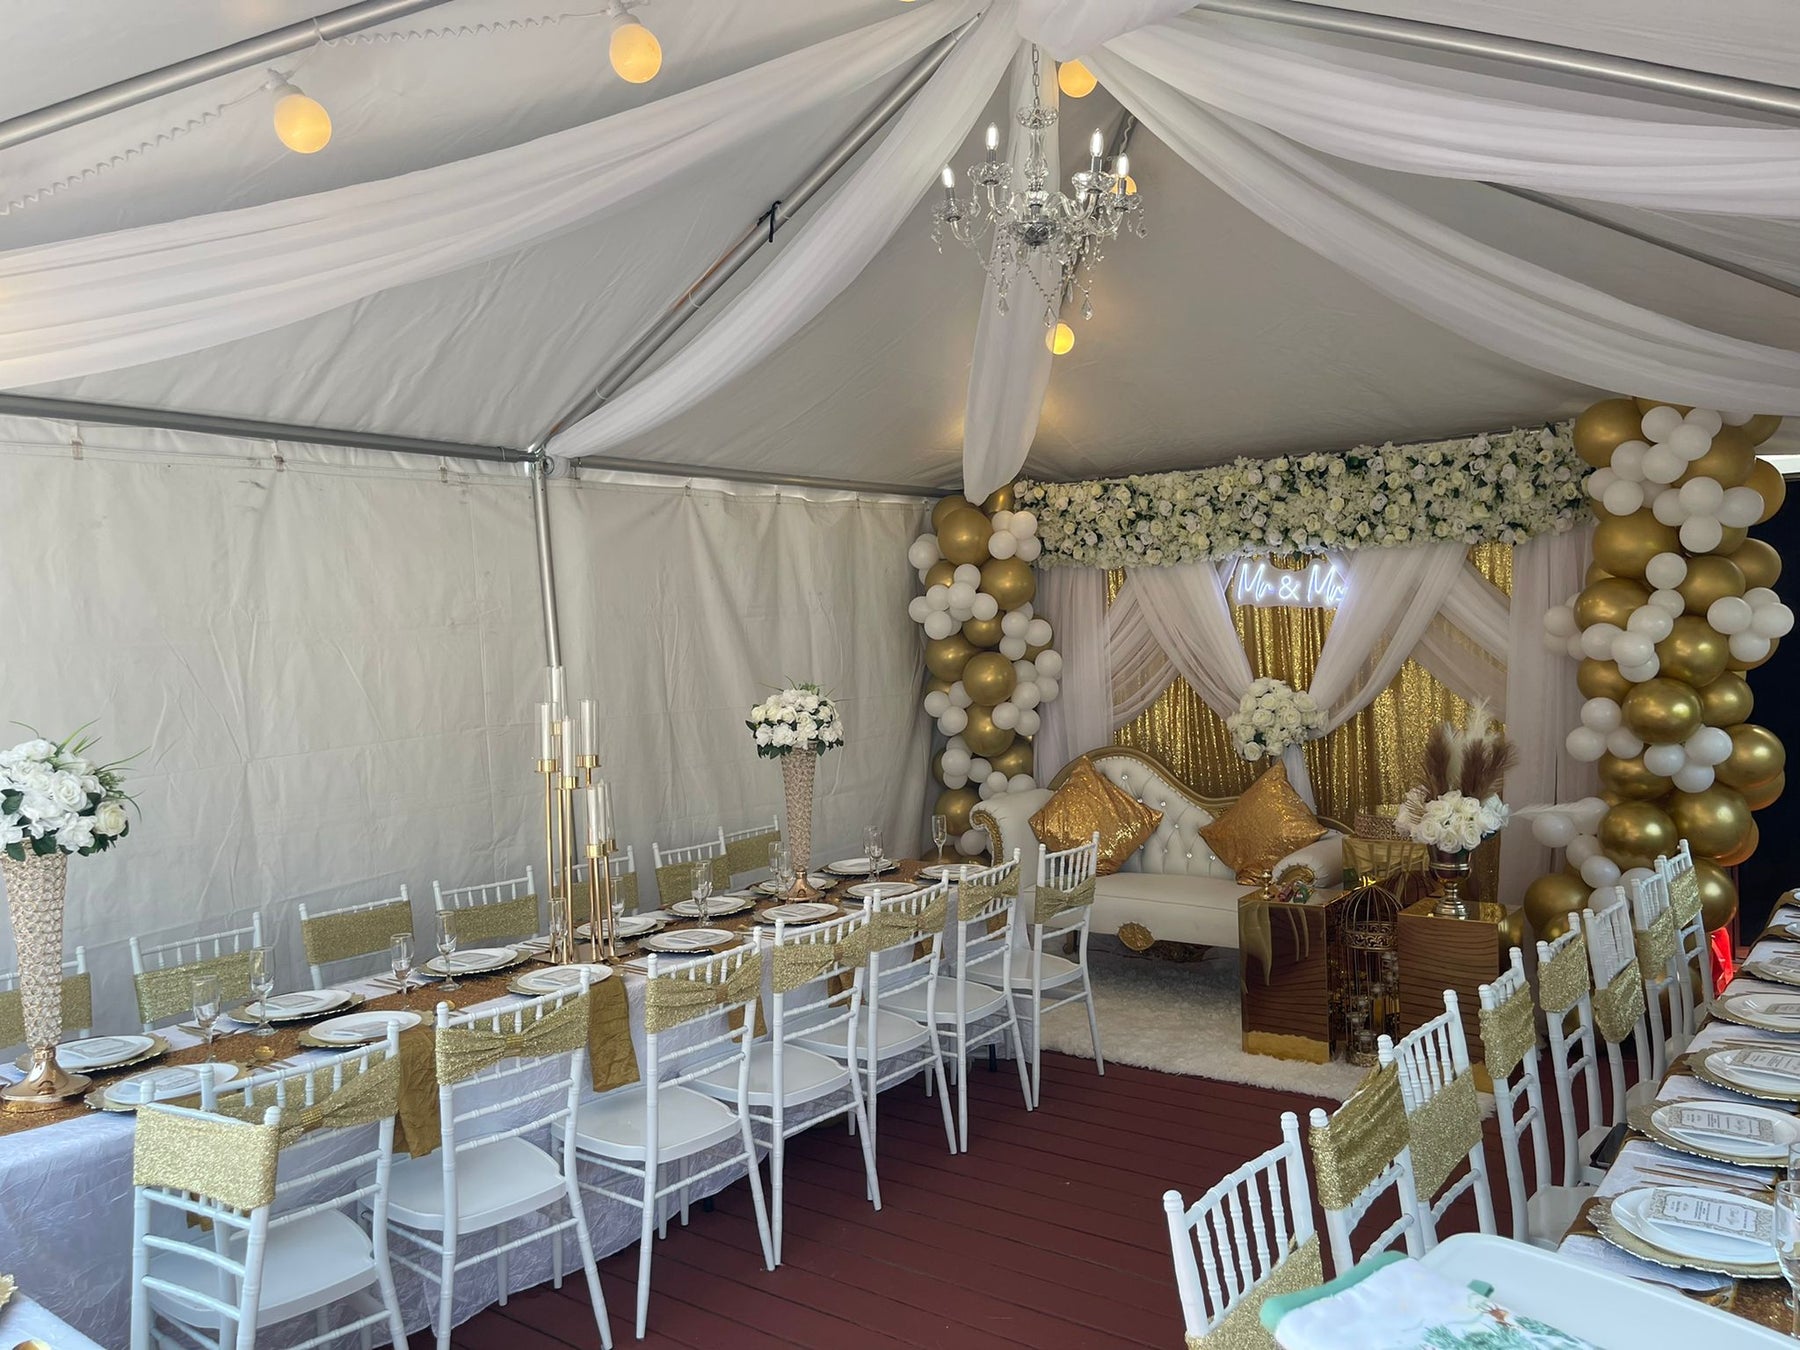 Most Requested Items For Event Rental Business